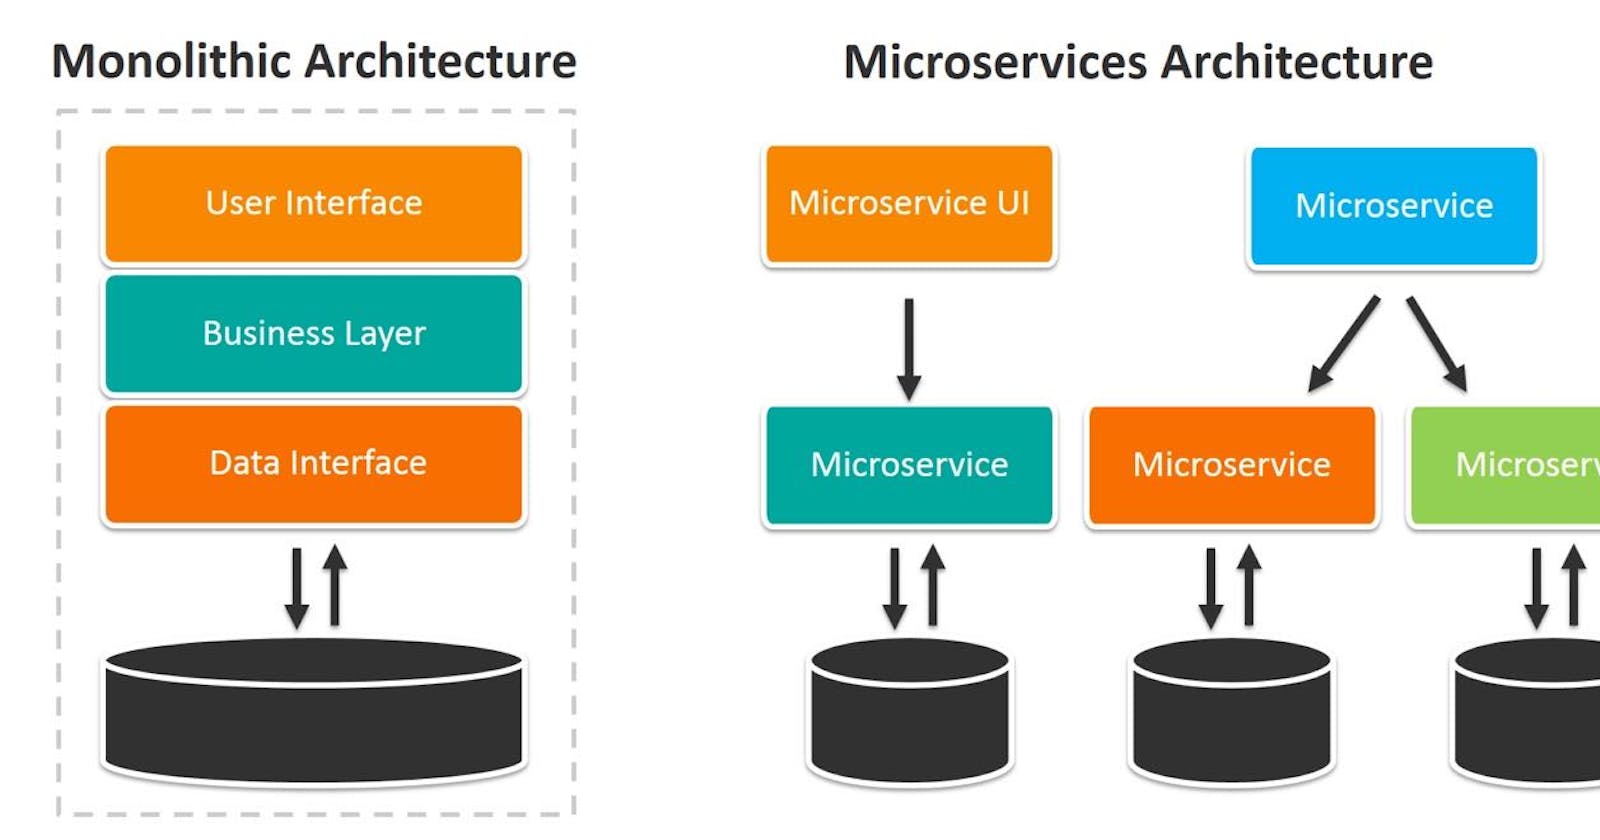 Getting Started with MicroServices